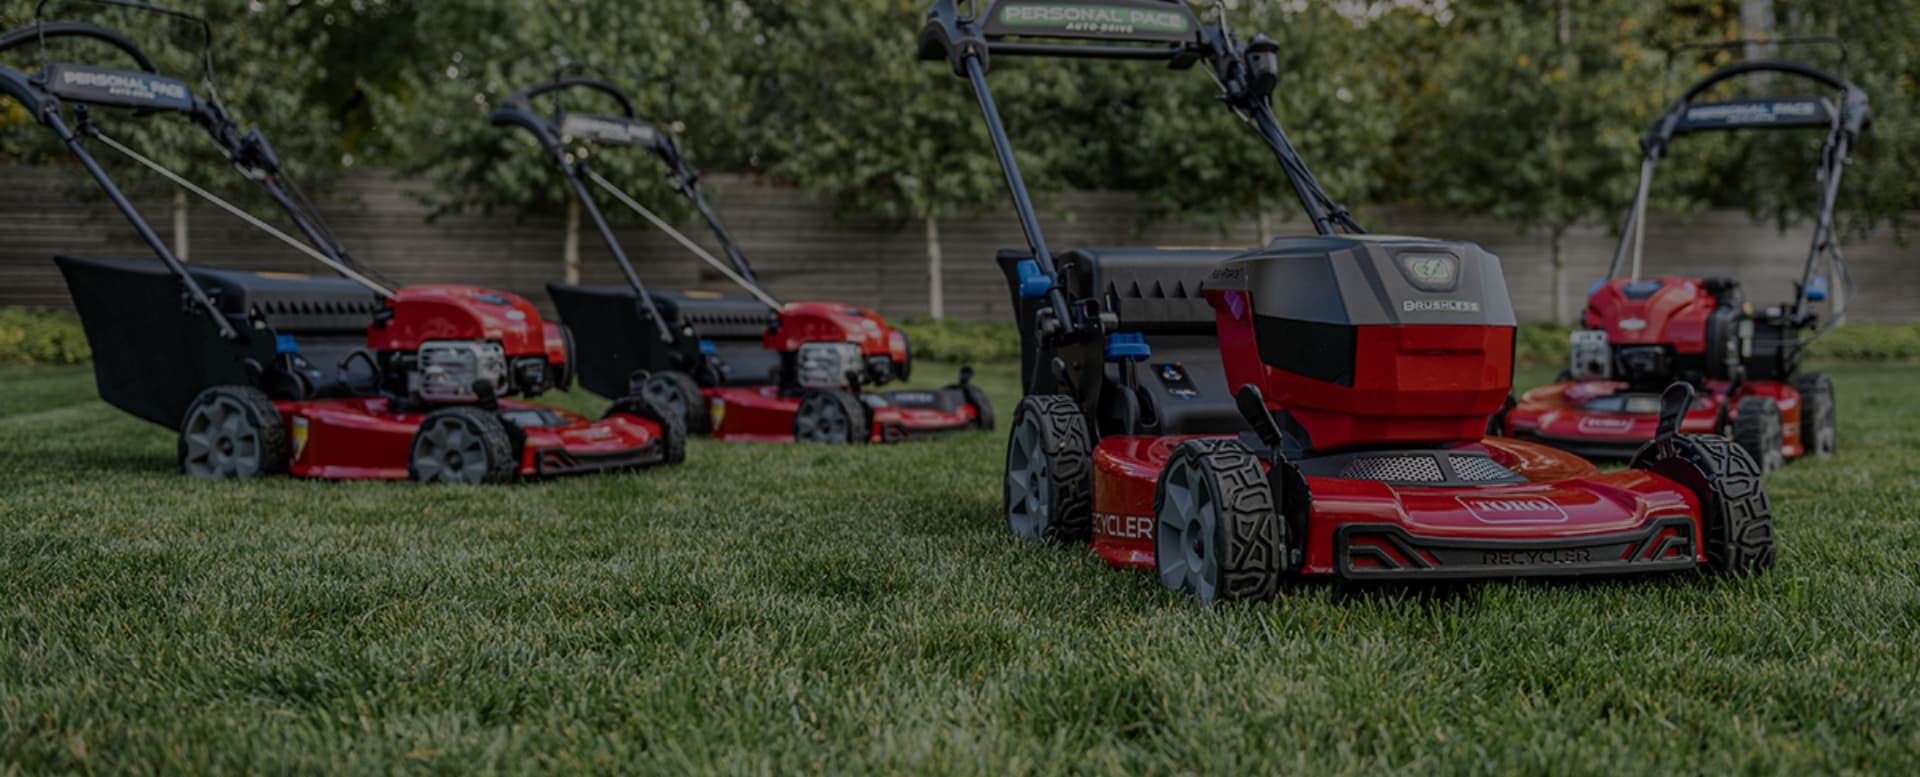 Toro products are available at Leslies Outdoor Power Equipment